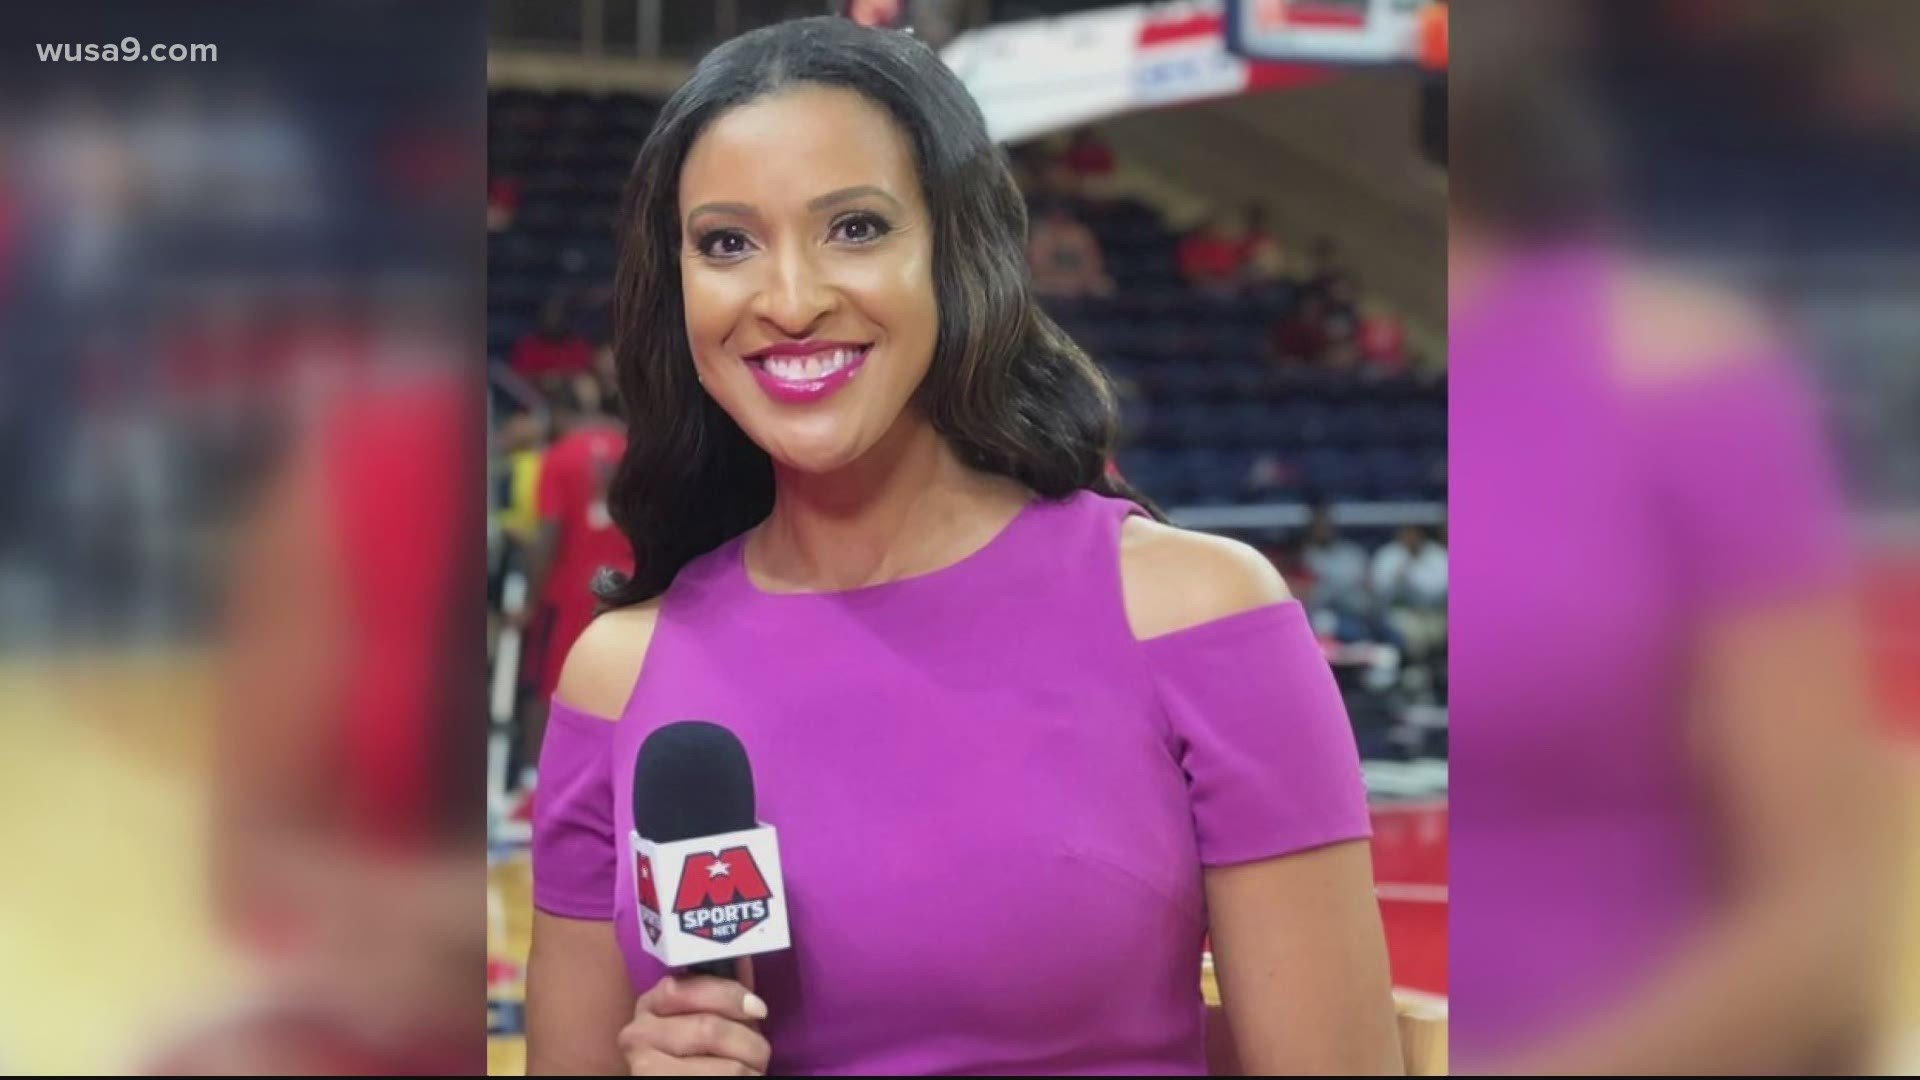 Megan McPeak will be part of the first all-female broadcast team to call a Toronto Raptors game. We spoke with her color analyst this week ahead of the game.